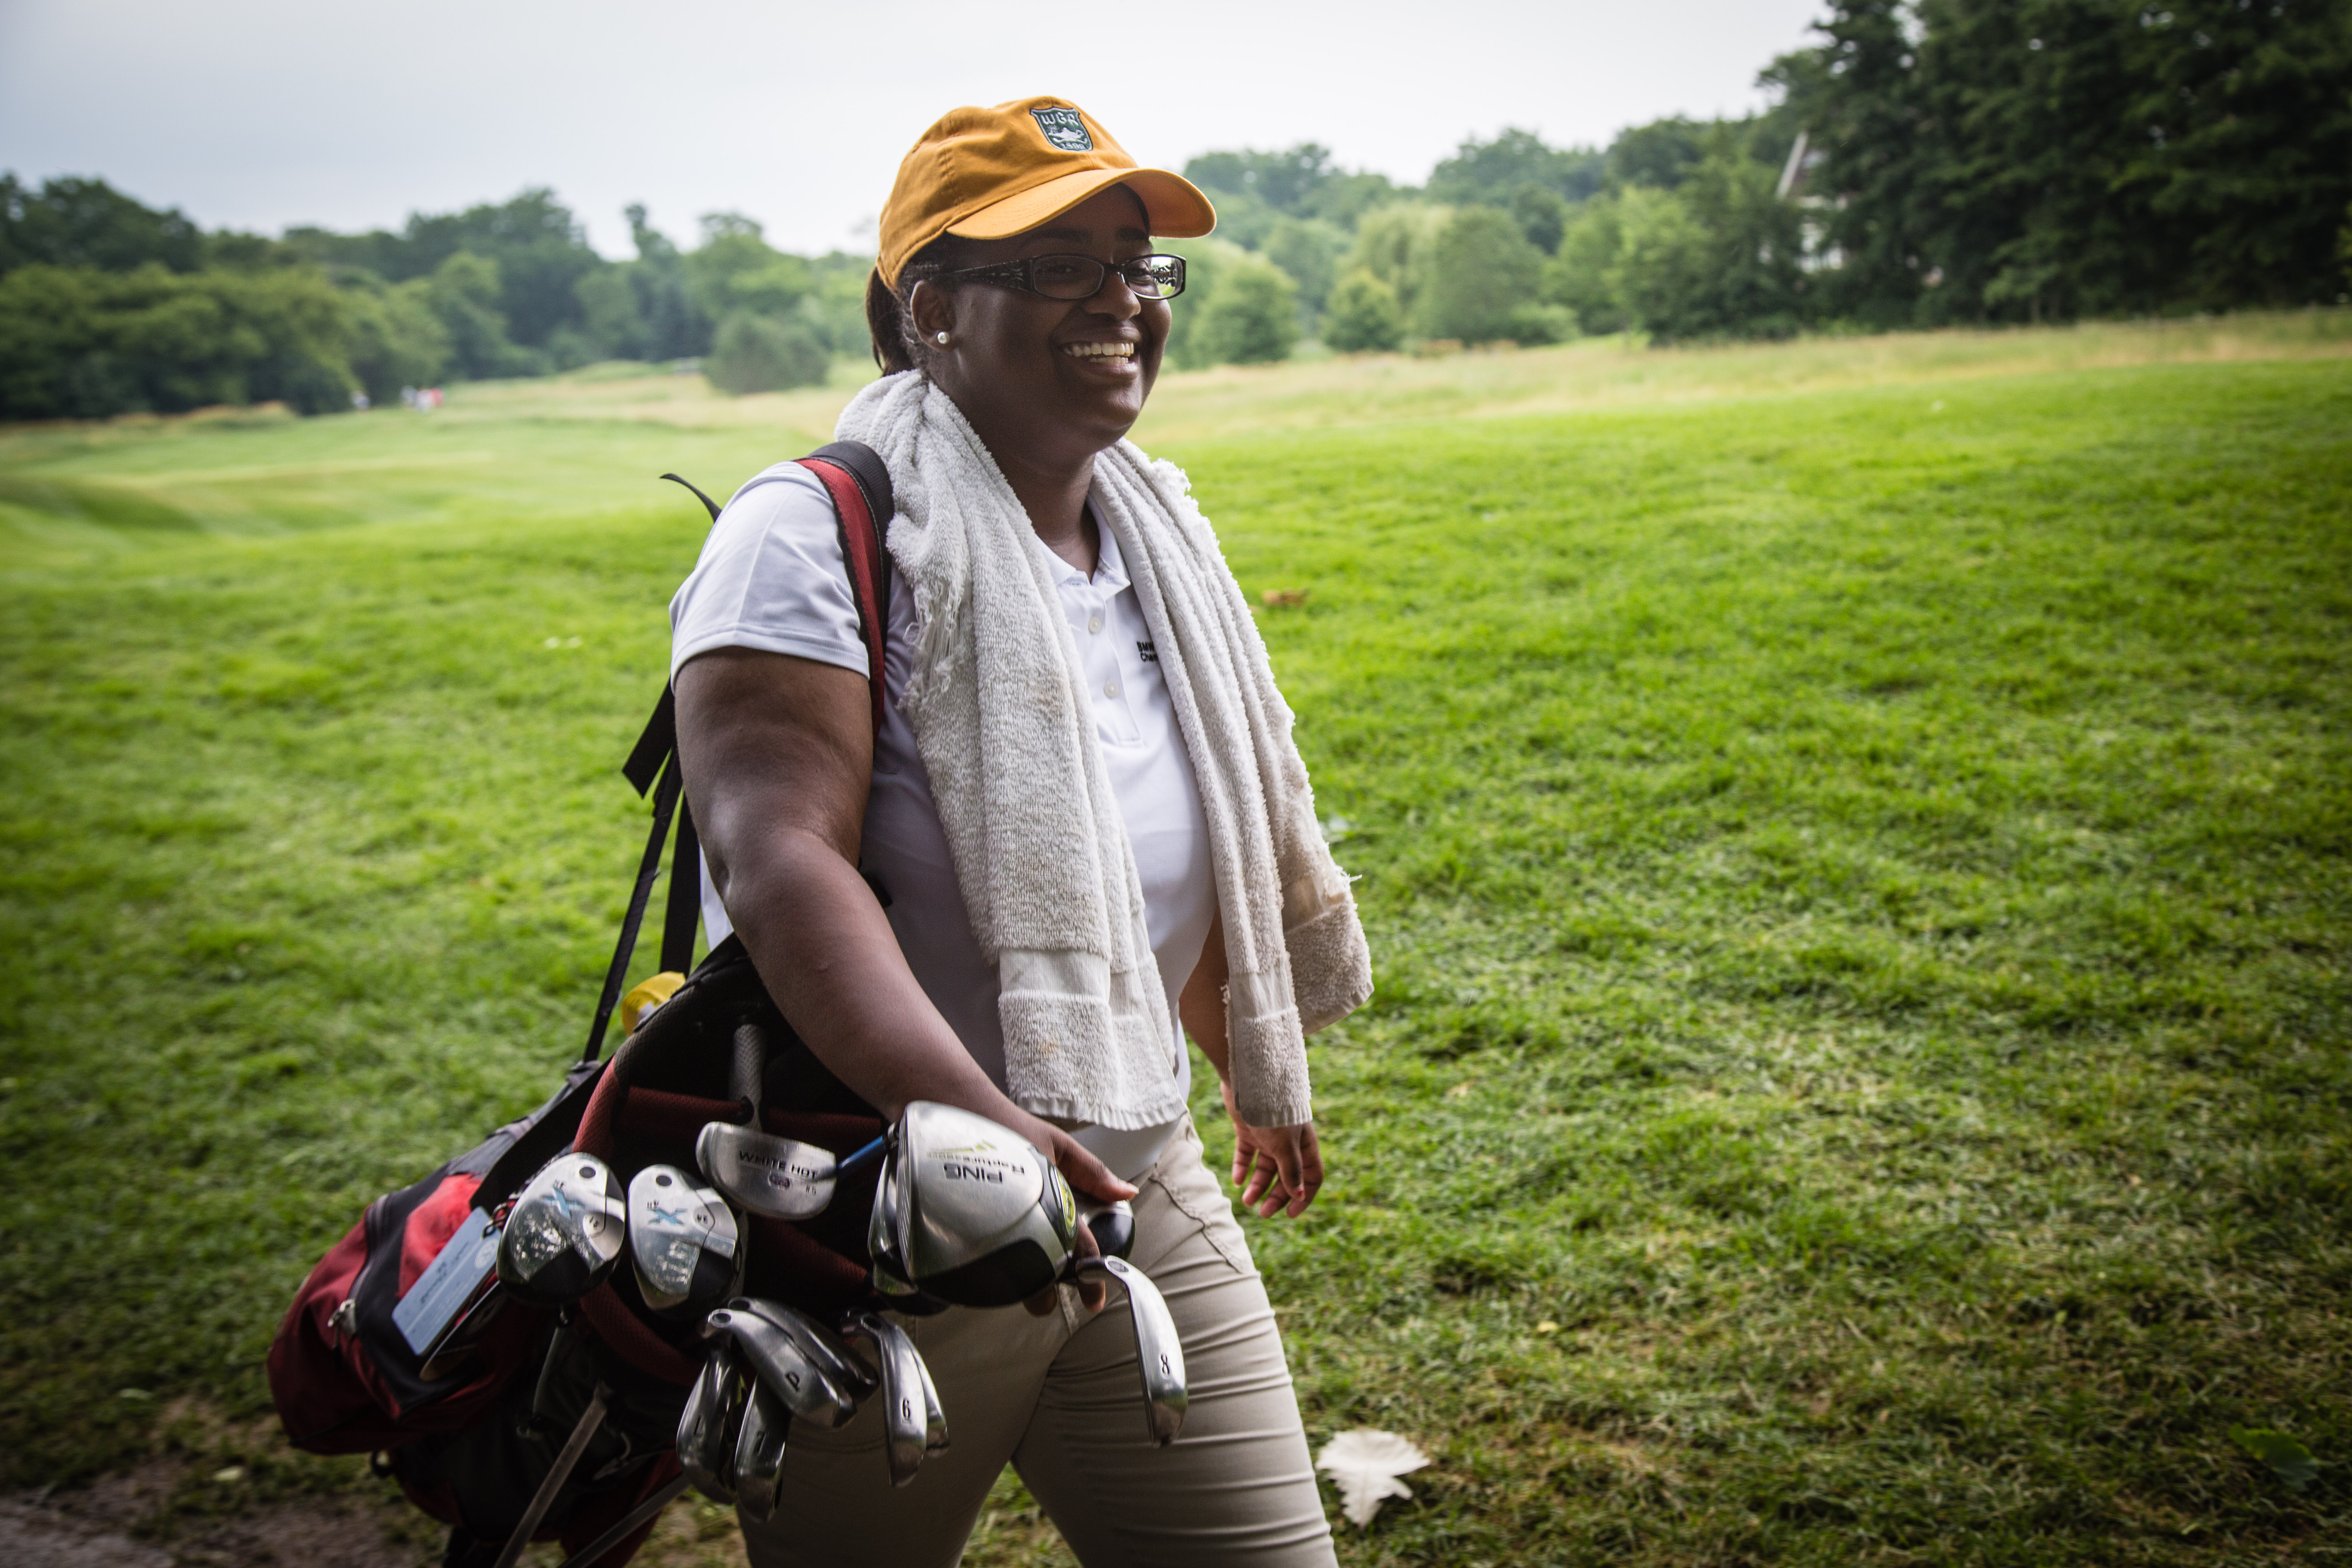 Shalonda Jones earned a full ride to Marquette after caddying for three summers. (Photo:©Charles Cherney Photography)